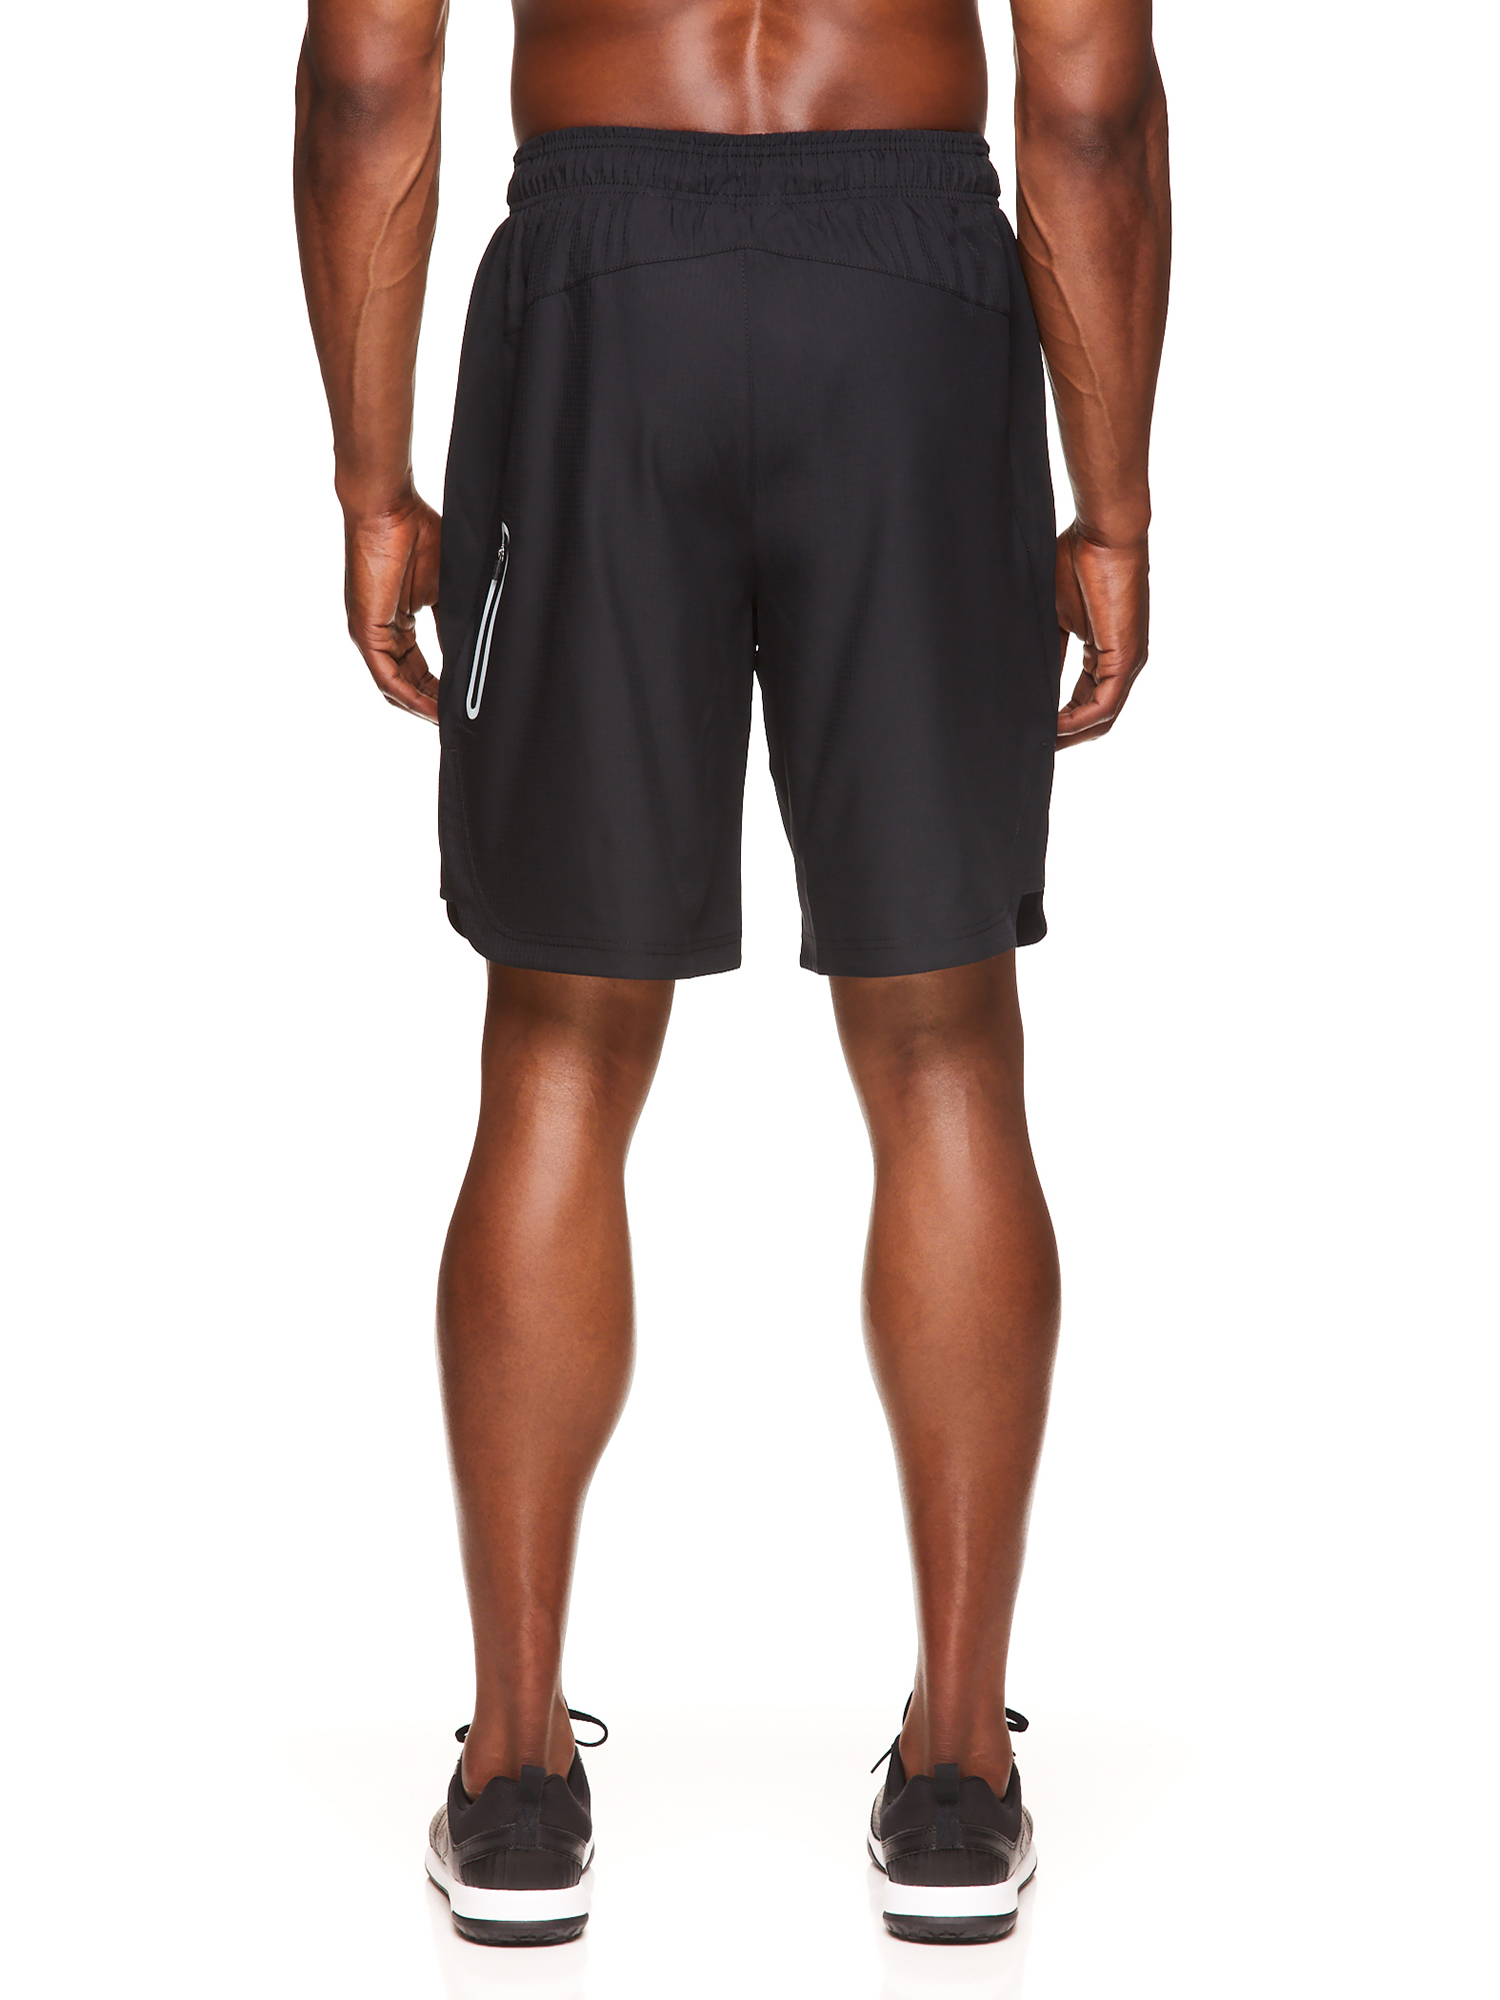 Reebok Men's and Big Men's Active Textured Woven Shorts, 9" Inseam, up to Size 3XL - image 2 of 4